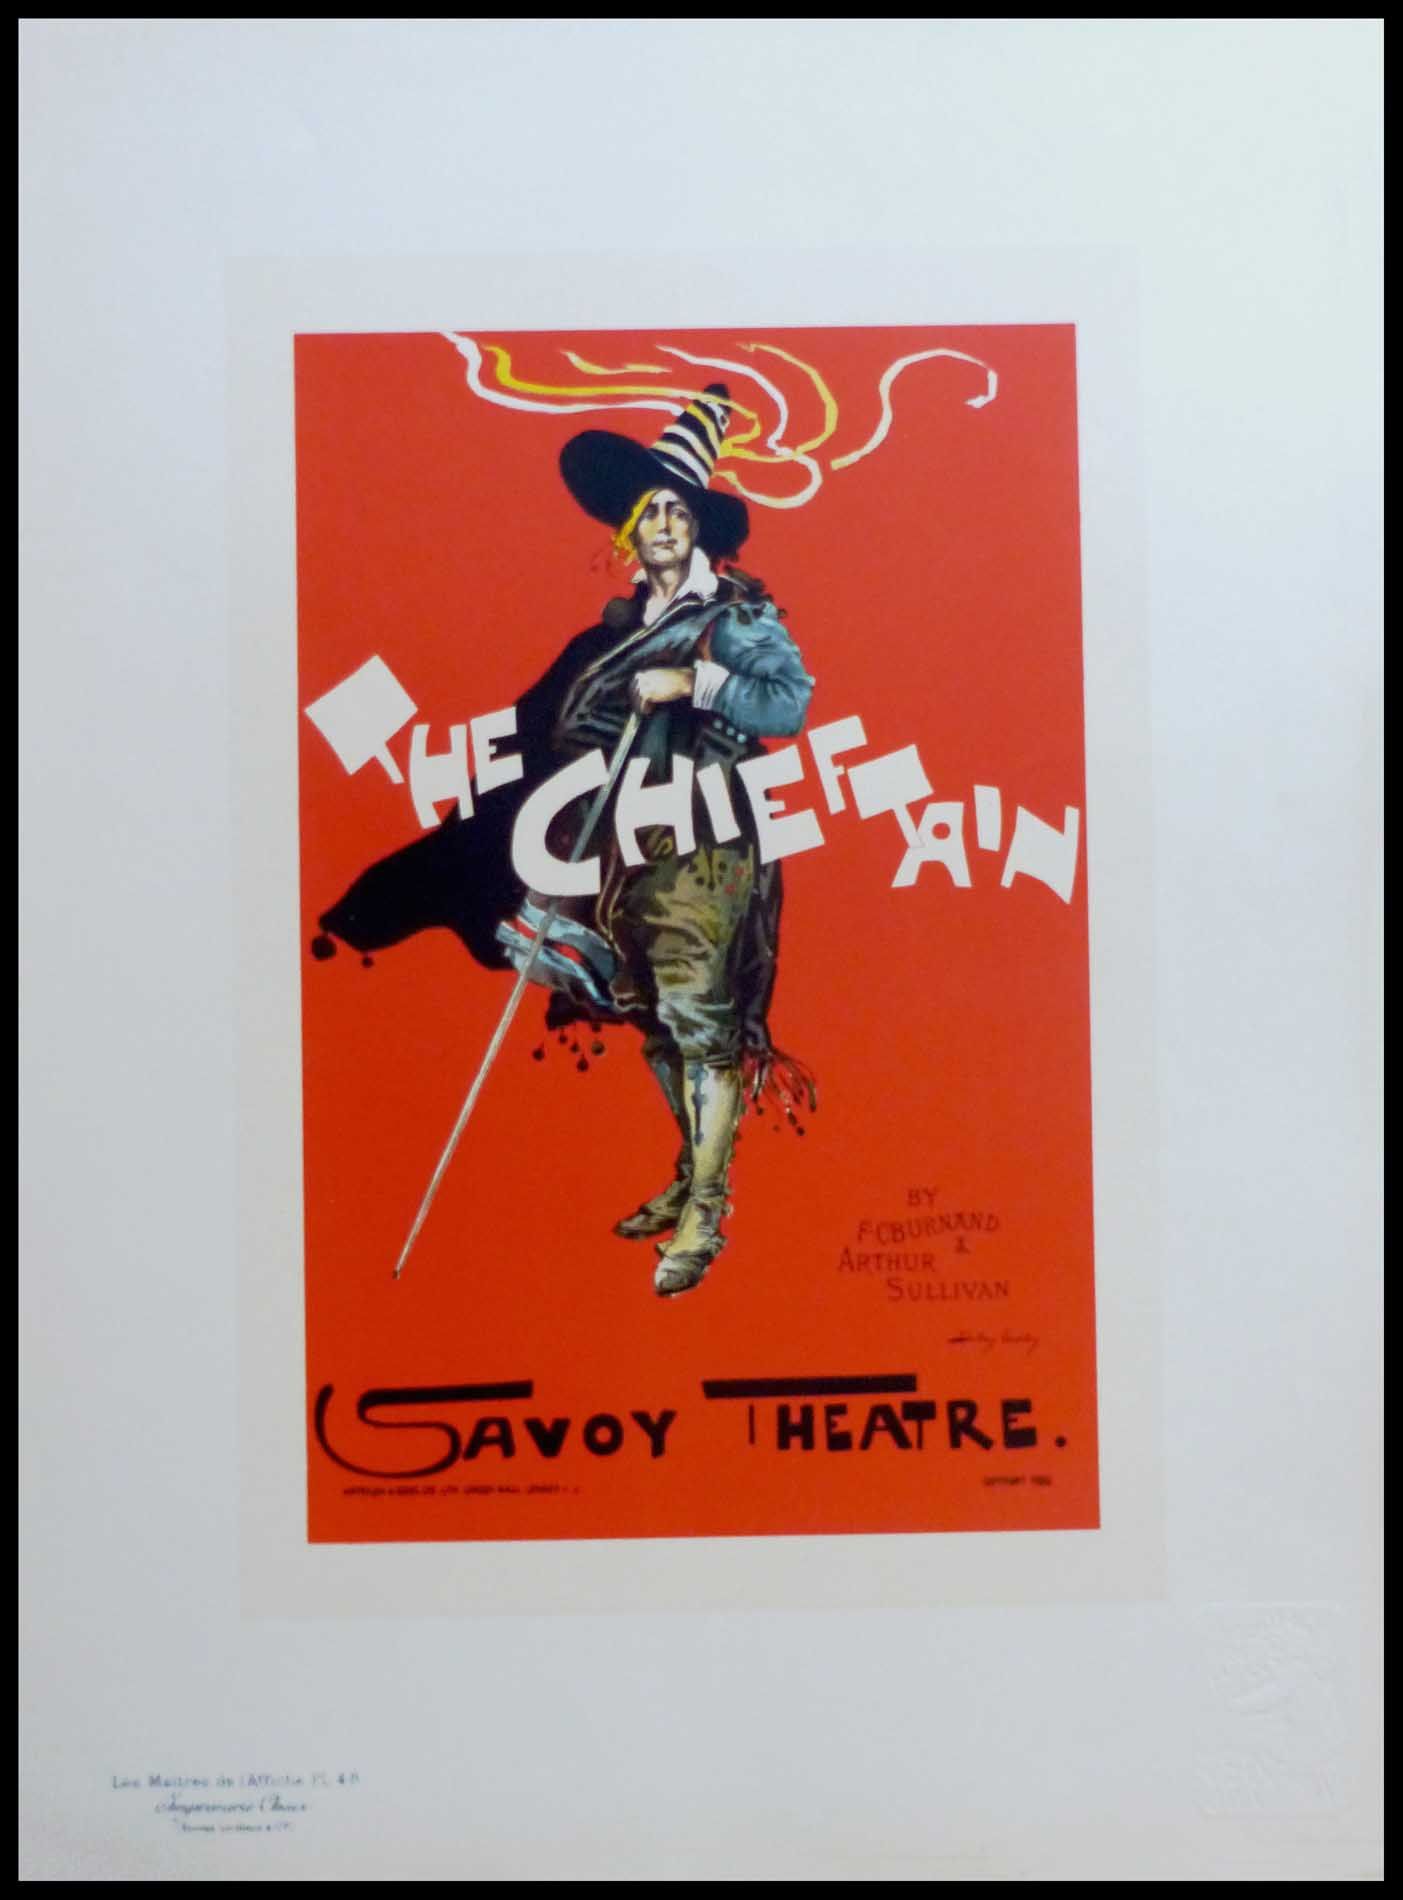 Dudley Hardy Dudley HARDY : (1867 - 1922)

The Chieftain Savoy Theatre

1896

Or&hellip;